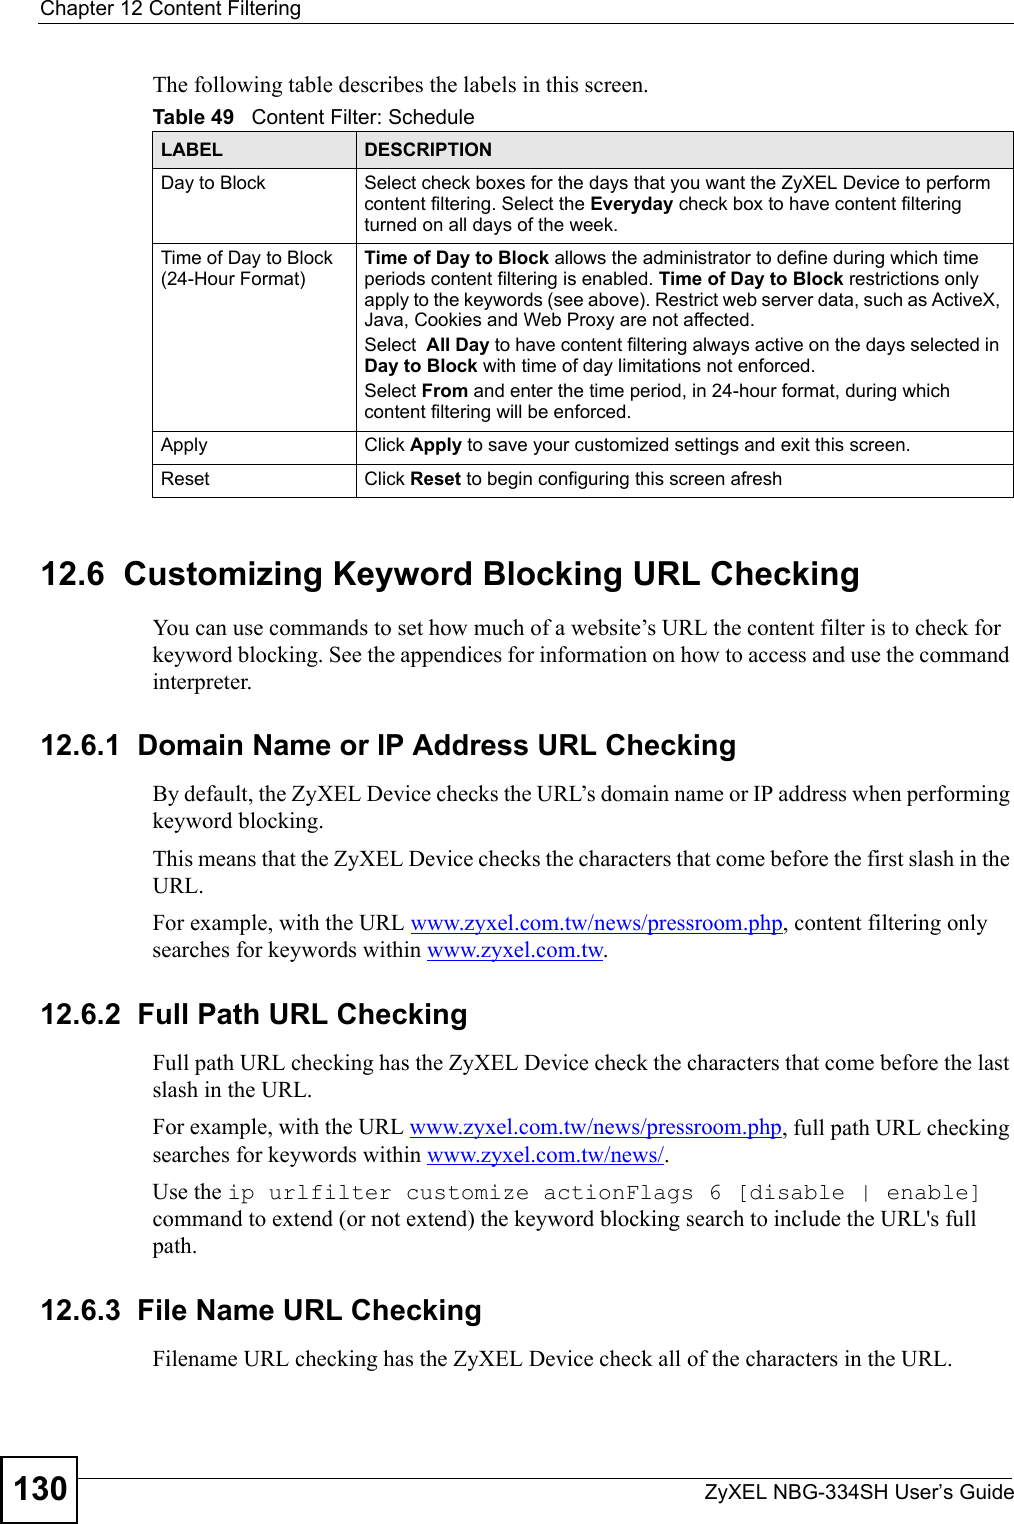 Chapter 12 Content FilteringZyXEL NBG-334SH User’s Guide130The following table describes the labels in this screen.12.6  Customizing Keyword Blocking URL CheckingYou can use commands to set how much of a website’s URL the content filter is to check for keyword blocking. See the appendices for information on how to access and use the command interpreter.12.6.1  Domain Name or IP Address URL CheckingBy default, the ZyXEL Device checks the URL’s domain name or IP address when performing keyword blocking.This means that the ZyXEL Device checks the characters that come before the first slash in the URL.For example, with the URL www.zyxel.com.tw/news/pressroom.php, content filtering only searches for keywords within www.zyxel.com.tw.12.6.2  Full Path URL CheckingFull path URL checking has the ZyXEL Device check the characters that come before the last slash in the URL.For example, with the URL www.zyxel.com.tw/news/pressroom.php, full path URL checking searches for keywords within www.zyxel.com.tw/news/.Use the ip urlfilter customize actionFlags 6 [disable | enable] command to extend (or not extend) the keyword blocking search to include the URL&apos;s full path.12.6.3  File Name URL CheckingFilename URL checking has the ZyXEL Device check all of the characters in the URL.Table 49   Content Filter: ScheduleLABEL DESCRIPTIONDay to Block Select check boxes for the days that you want the ZyXEL Device to perform content filtering. Select the Everyday check box to have content filtering turned on all days of the week.Time of Day to Block (24-Hour Format)Time of Day to Block allows the administrator to define during which time periods content filtering is enabled. Time of Day to Block restrictions only apply to the keywords (see above). Restrict web server data, such as ActiveX, Java, Cookies and Web Proxy are not affected.Select  All Day to have content filtering always active on the days selected in Day to Block with time of day limitations not enforced.Select From and enter the time period, in 24-hour format, during which content filtering will be enforced. Apply Click Apply to save your customized settings and exit this screen.Reset Click Reset to begin configuring this screen afresh